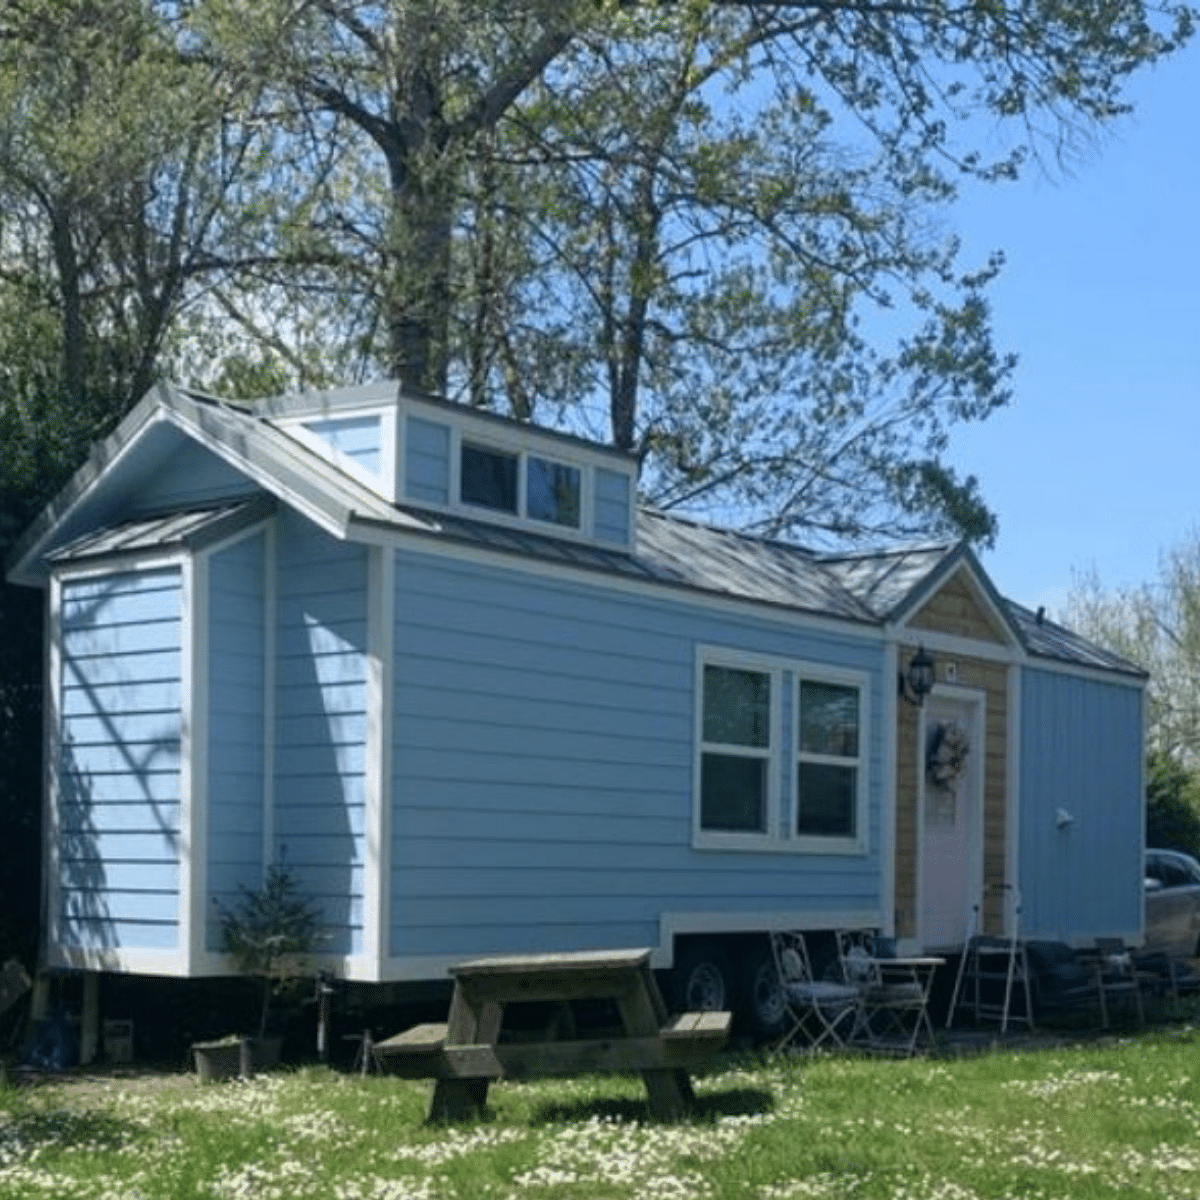 34’ Tiny Home on Wheels  is 410 sq ft tall